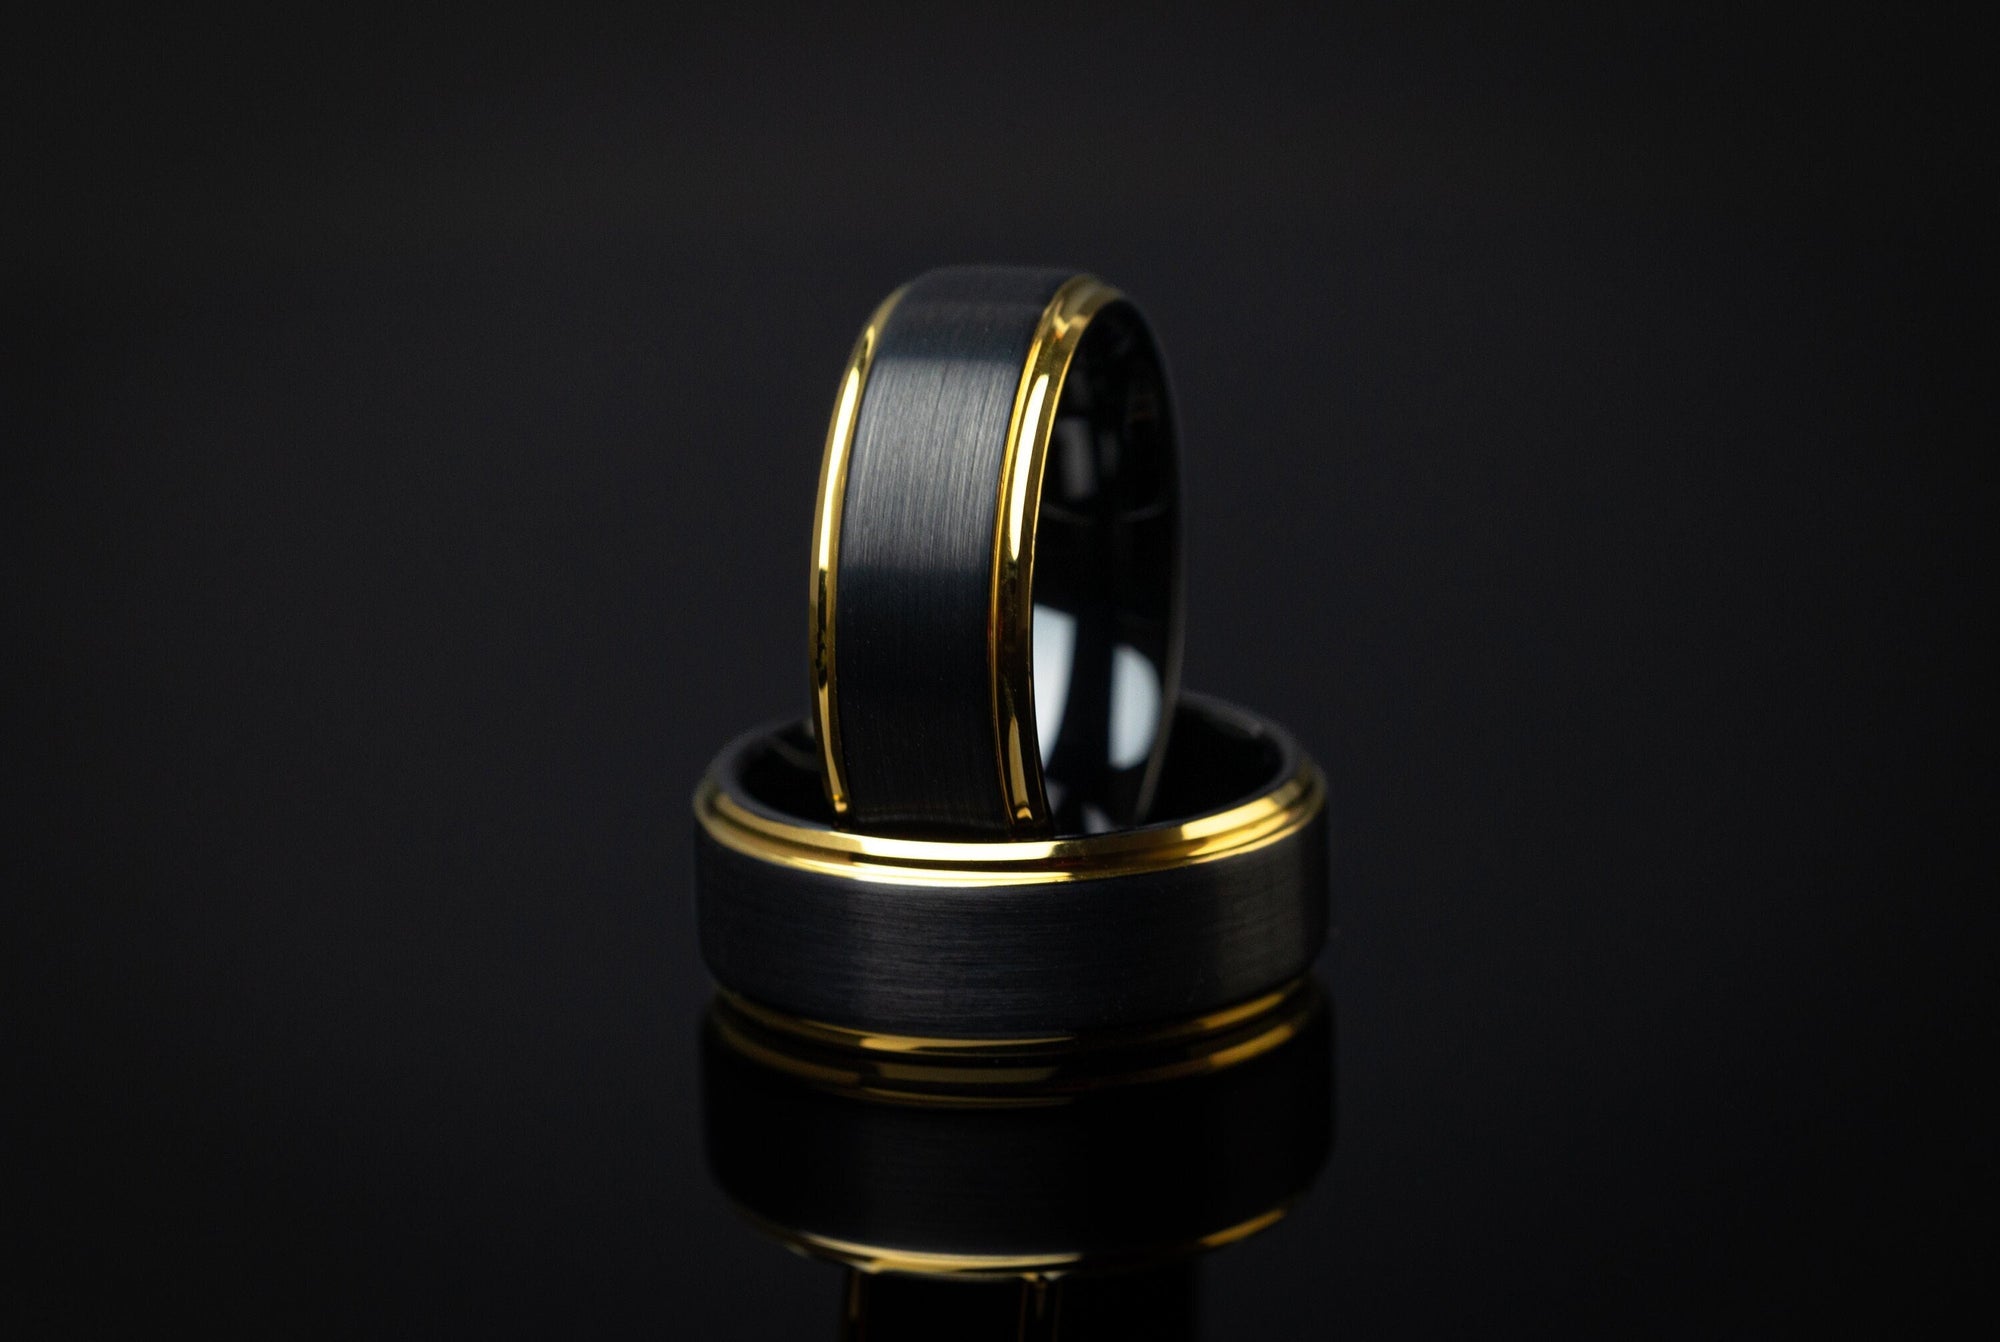 Eclipse - Black & Gold Tungsten Ring, 24k Gold Plated Ring, Mens Wedding Ring, 8mm Ring